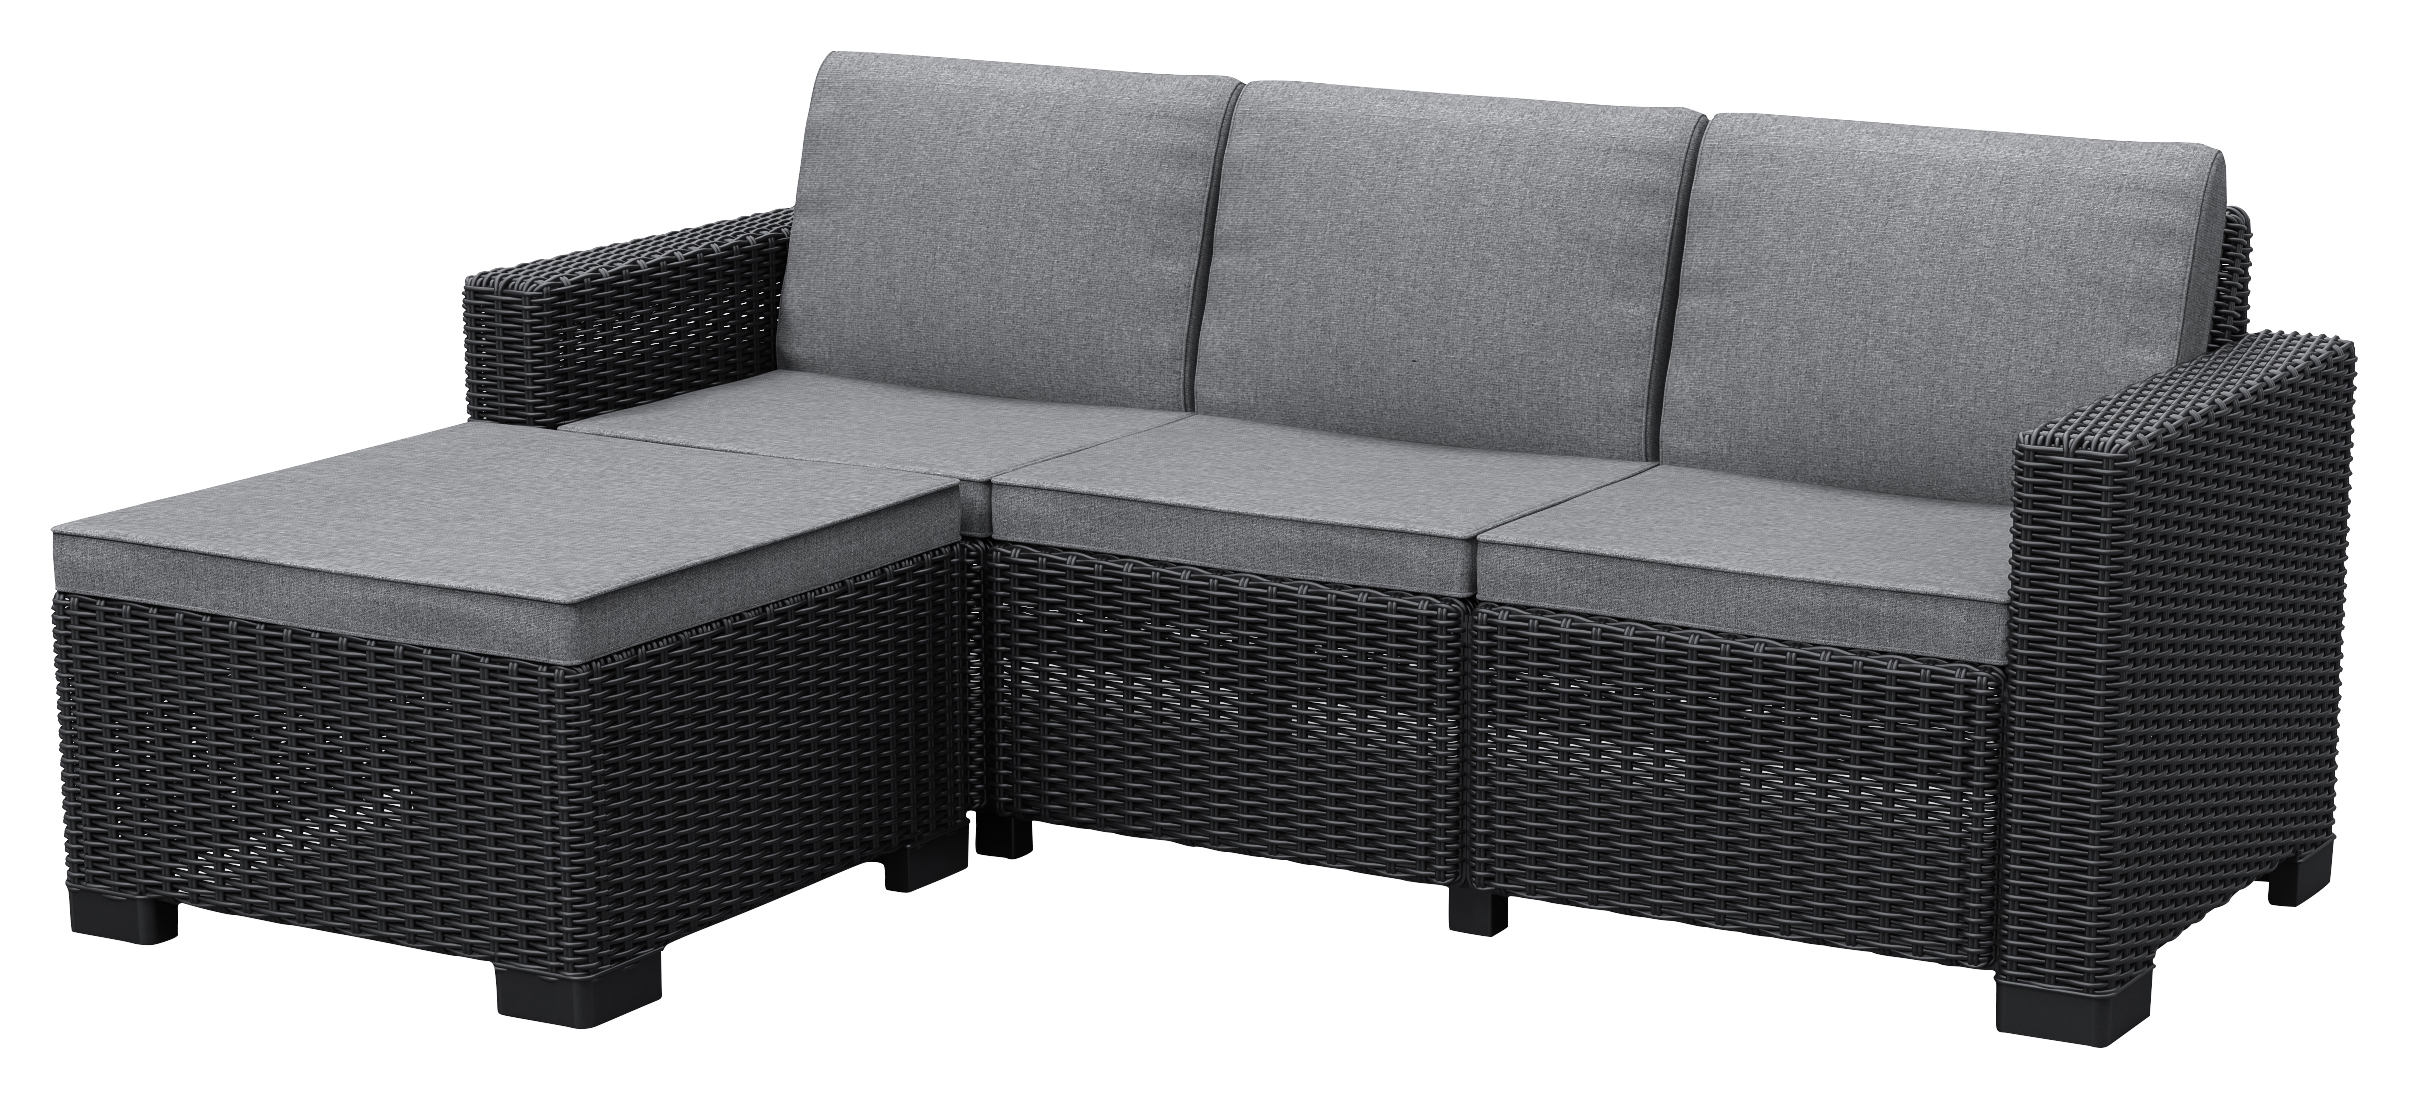 Keter California 3 Seater Outdoor Garden Furniture Chaise Longue - Graphite with Grey Cushions